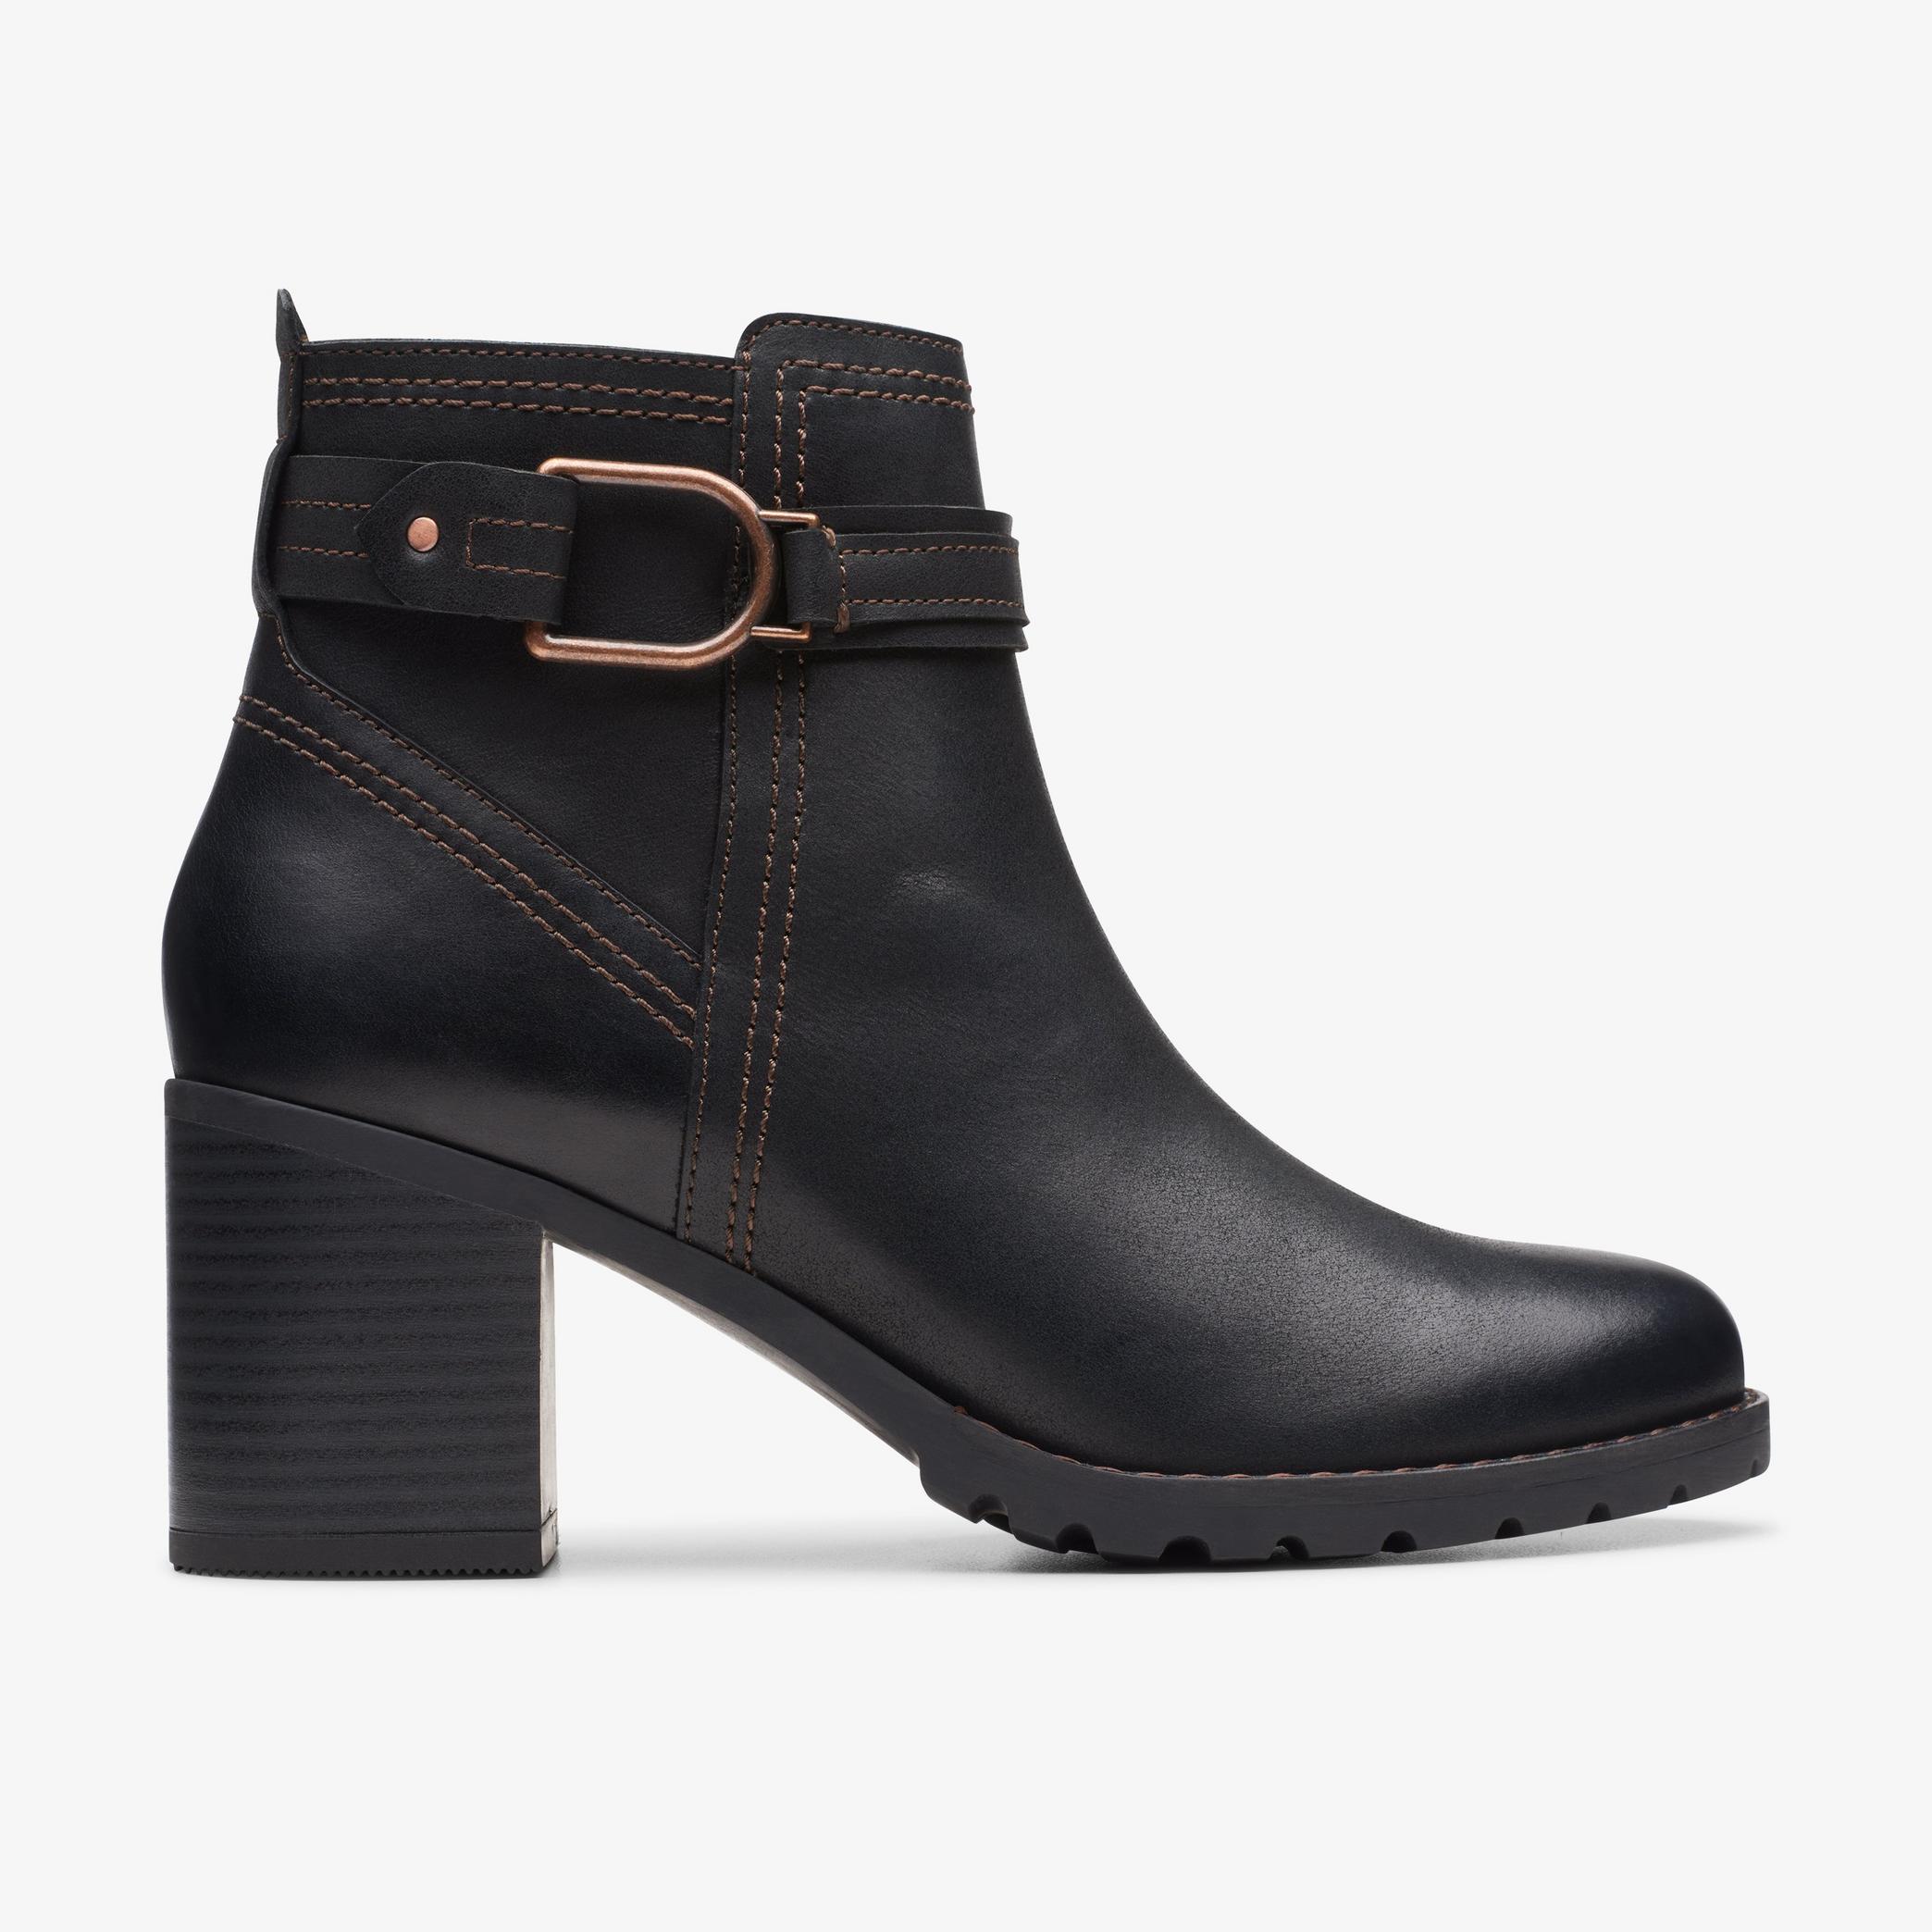 Leda Strap Black Leather Ankle Boots, view 1 of 7